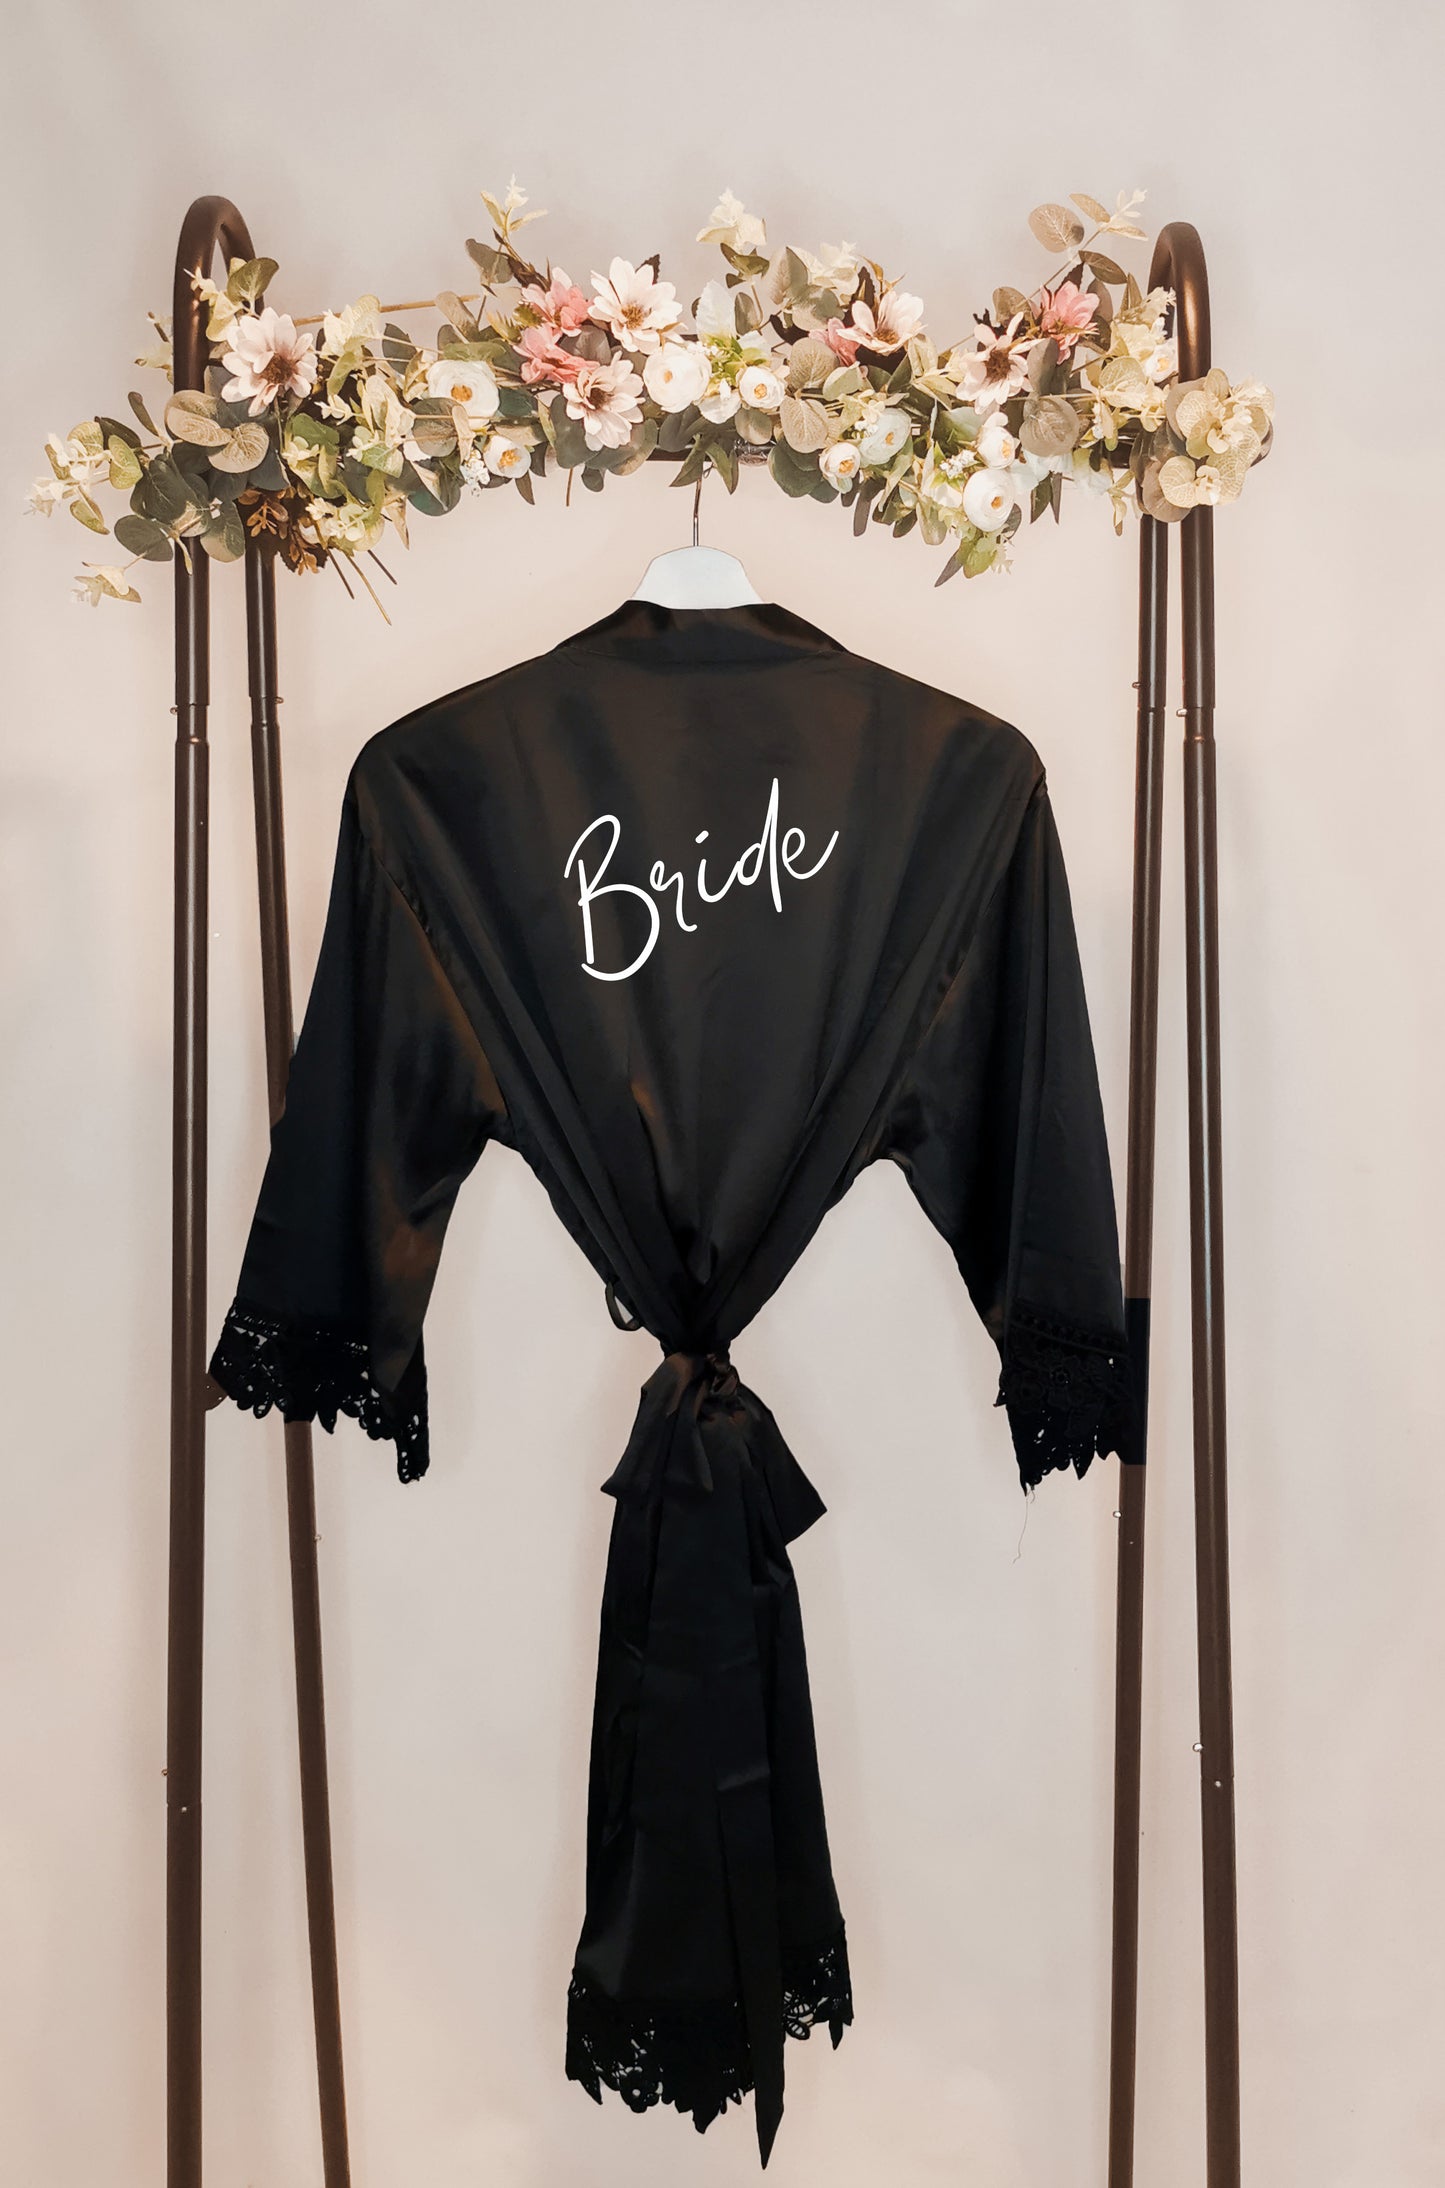 Personalised Mother of the Groom Robe, Custom Bridal Party Gift, Bridesmaid Robes, Hen Party, Bridal Shower Sleepover